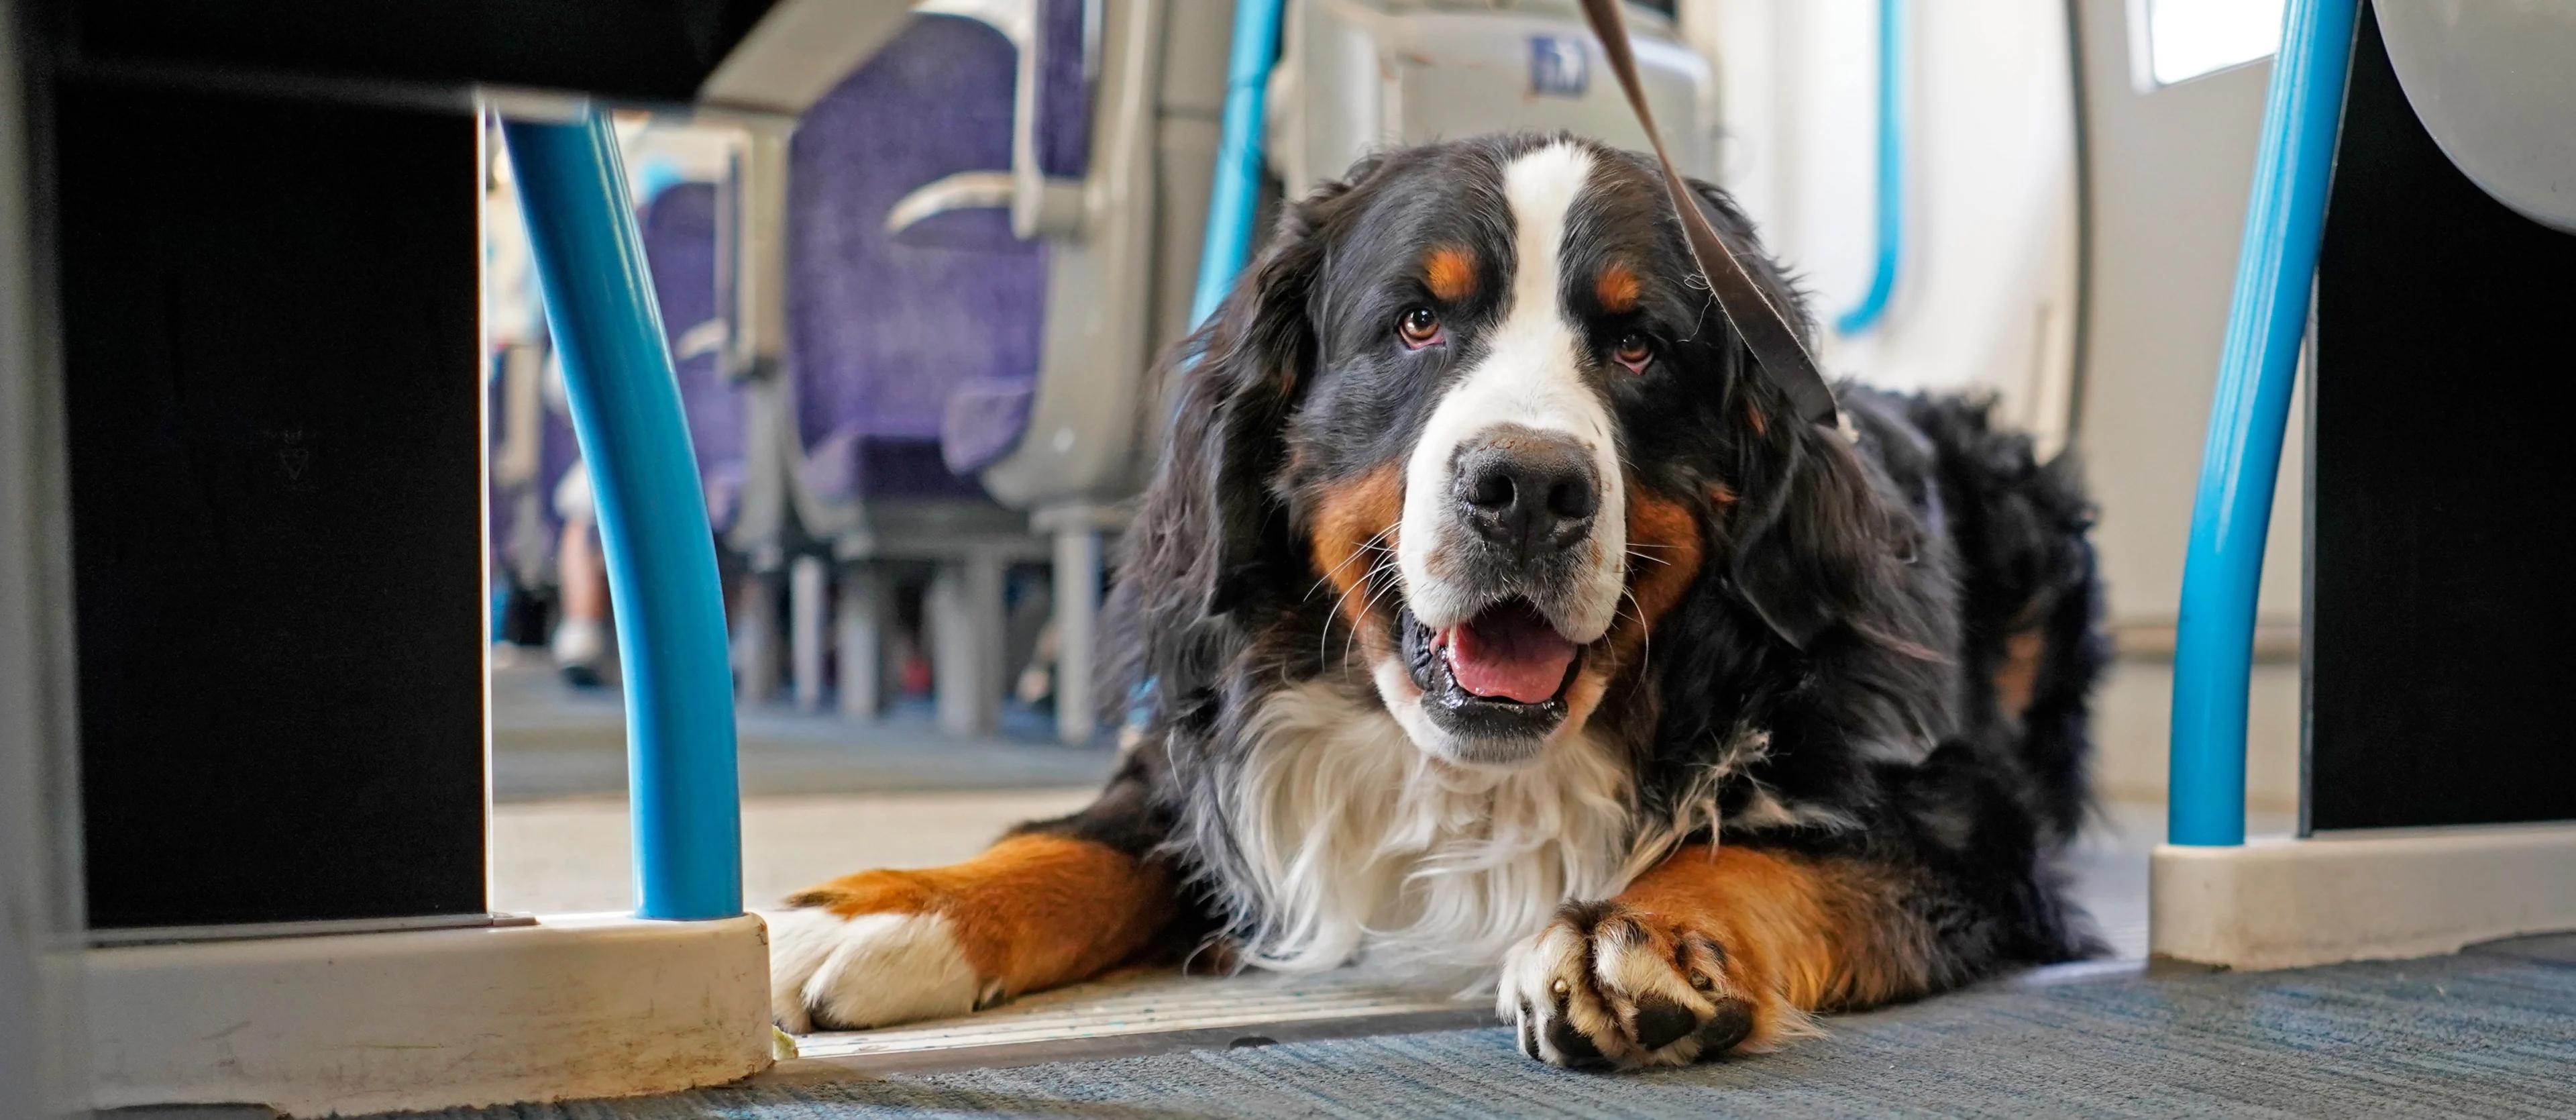 A dog on a lead sitting on the floor of a train